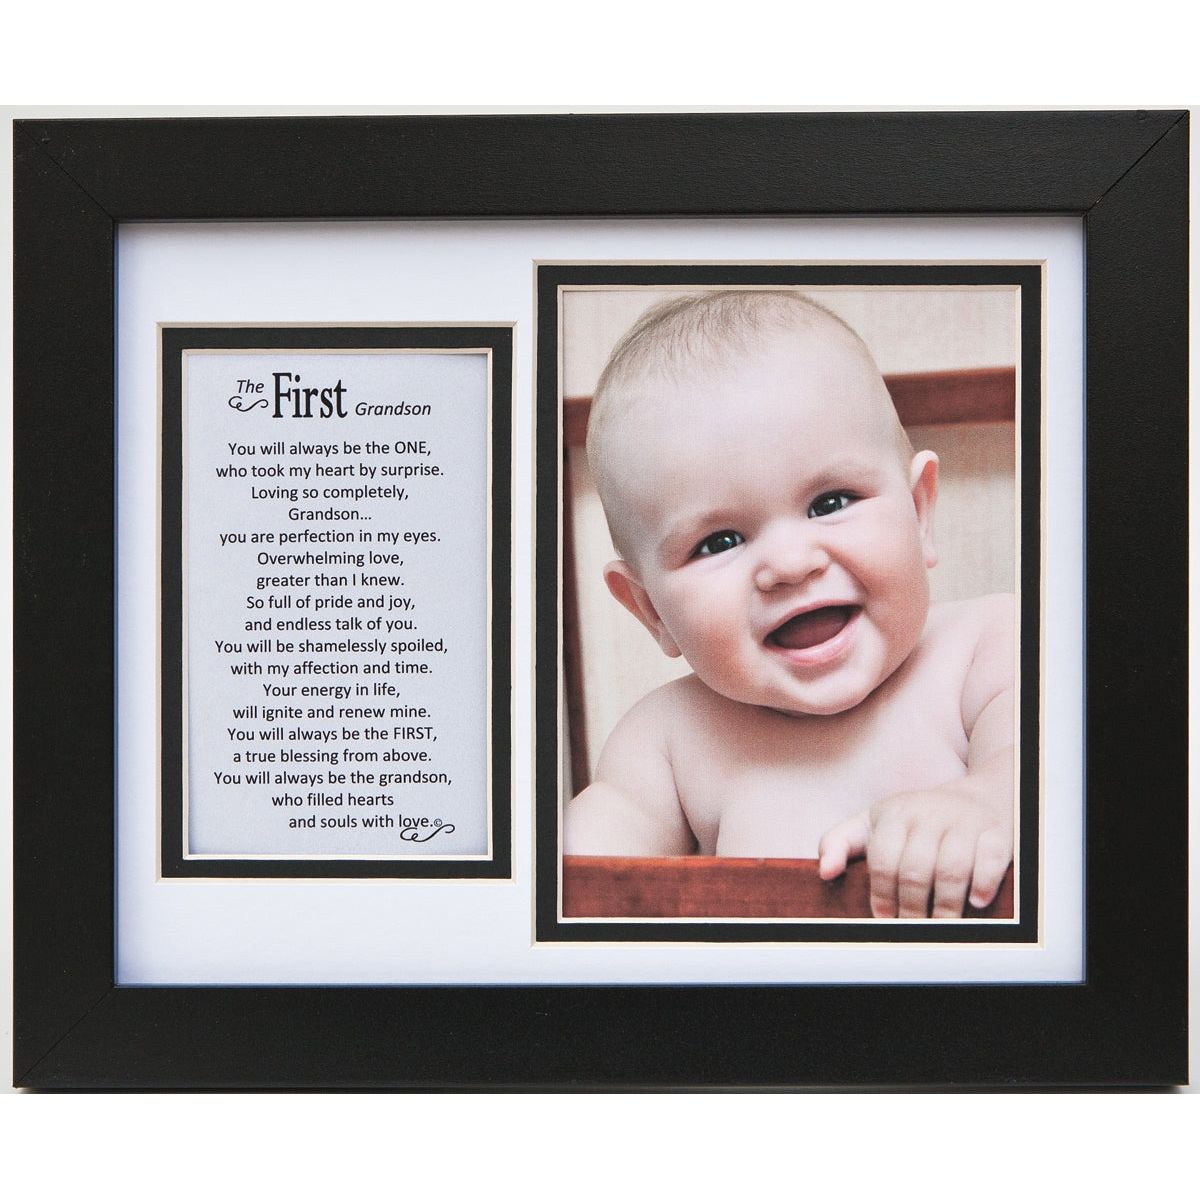 8x10 black frame with white and black double mat, includes &quot;First Grandson&quot; poem and space for photo.